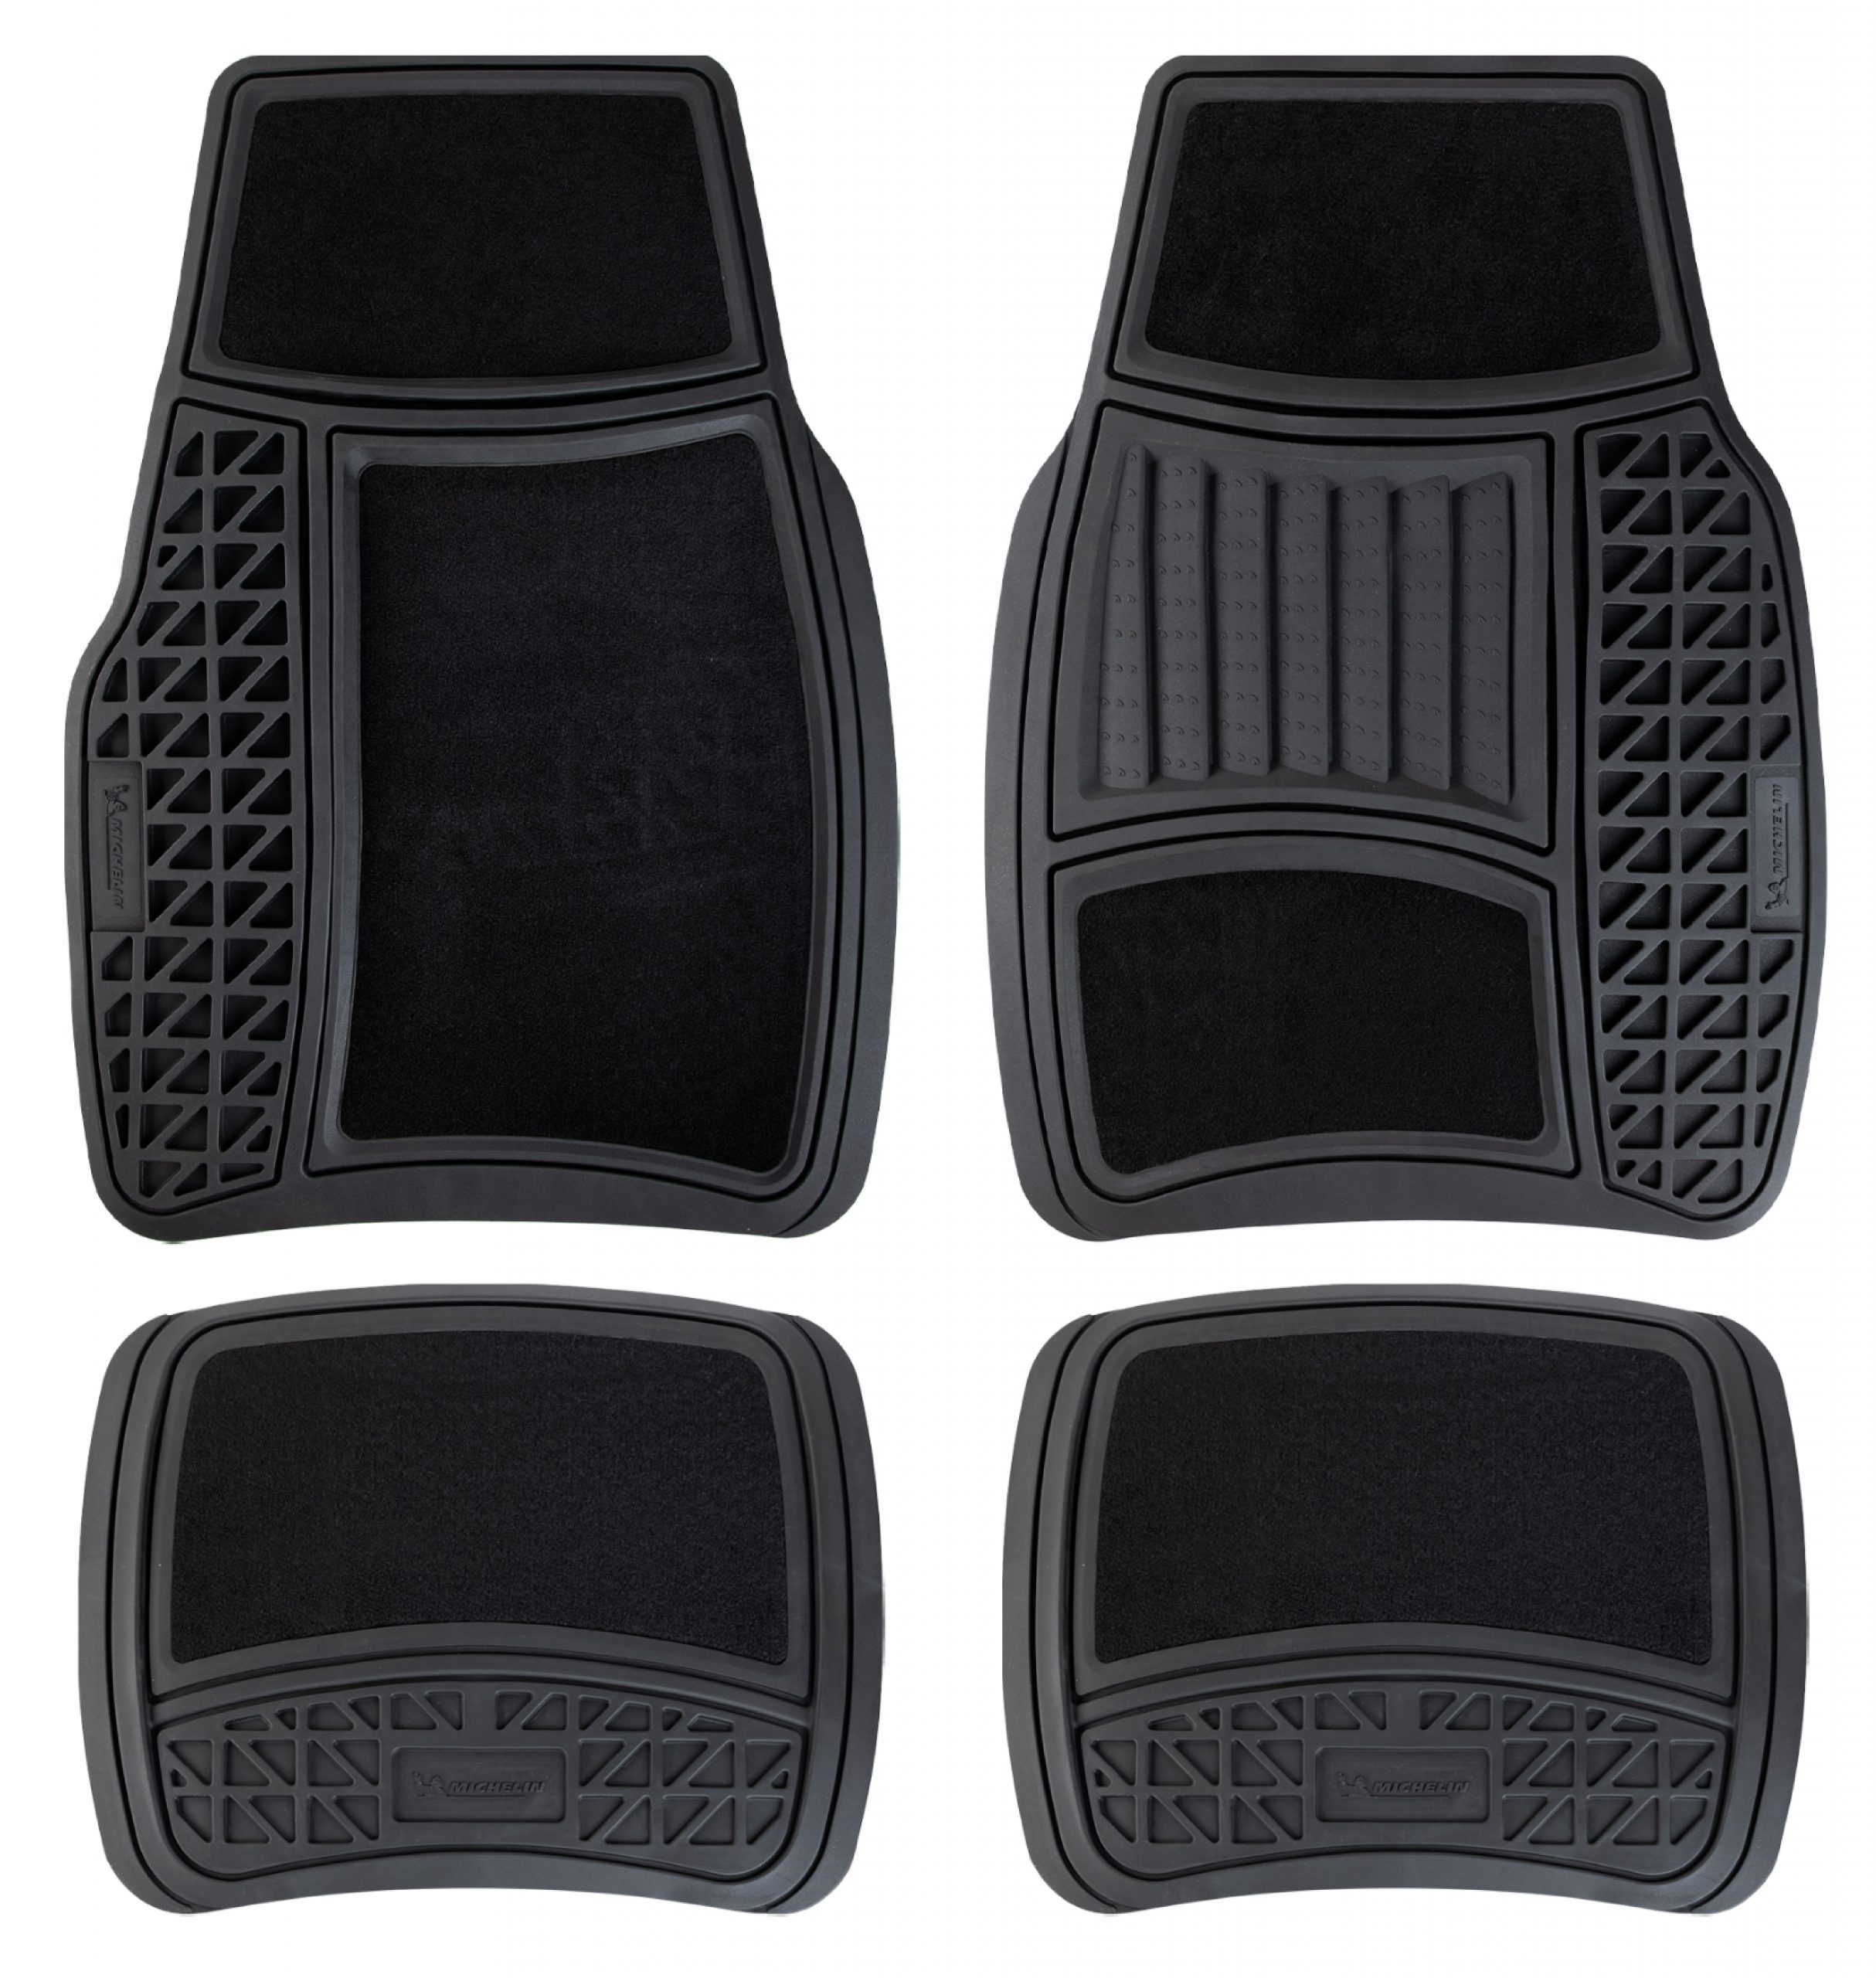 MICHELIN Car mats All-Weather Premium protection with Flex Lines 4